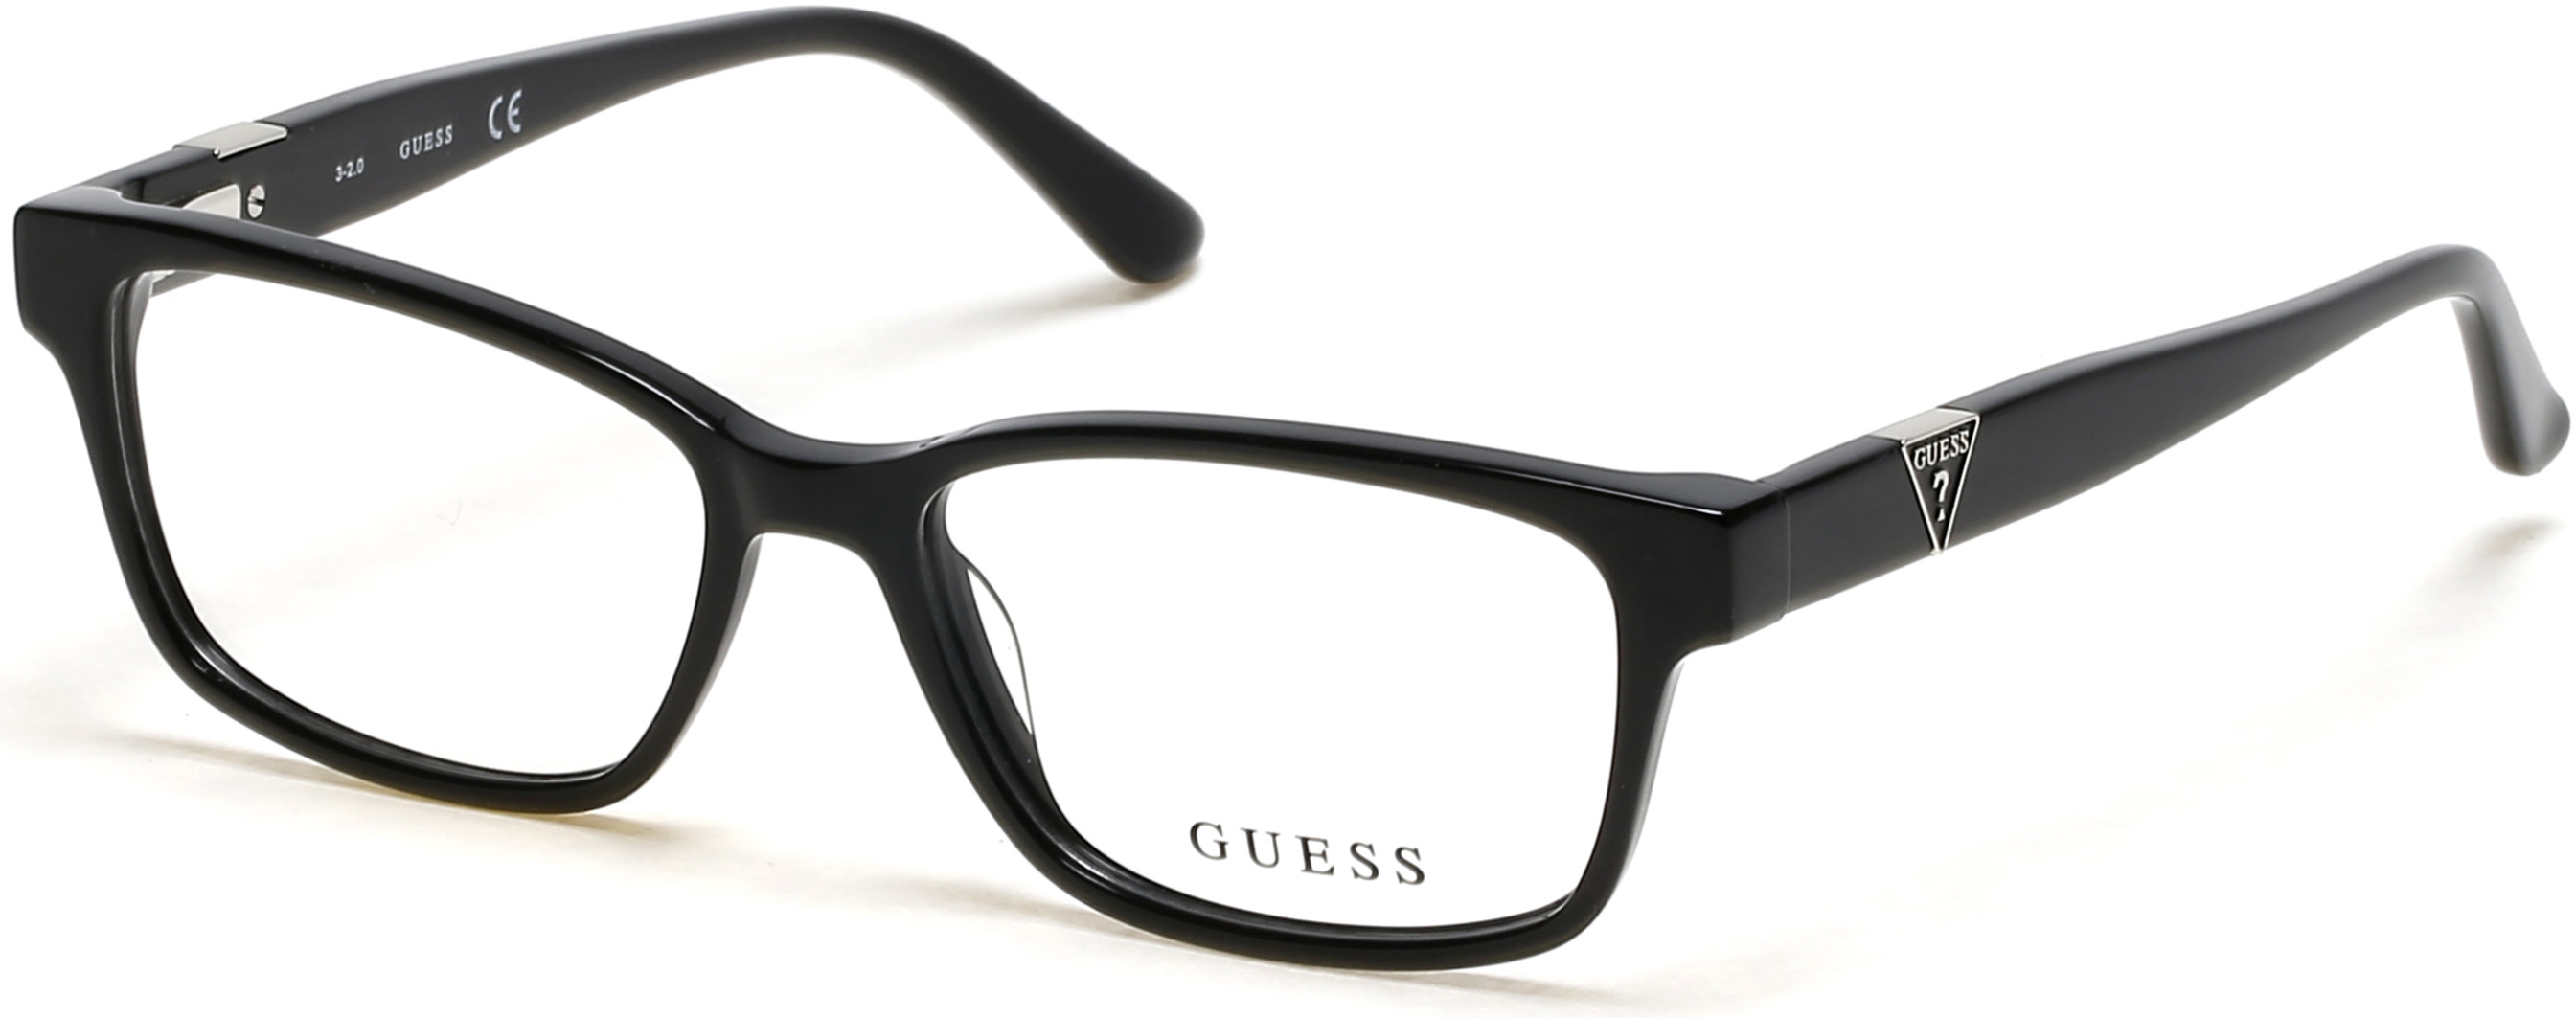 GUESS 9201 001